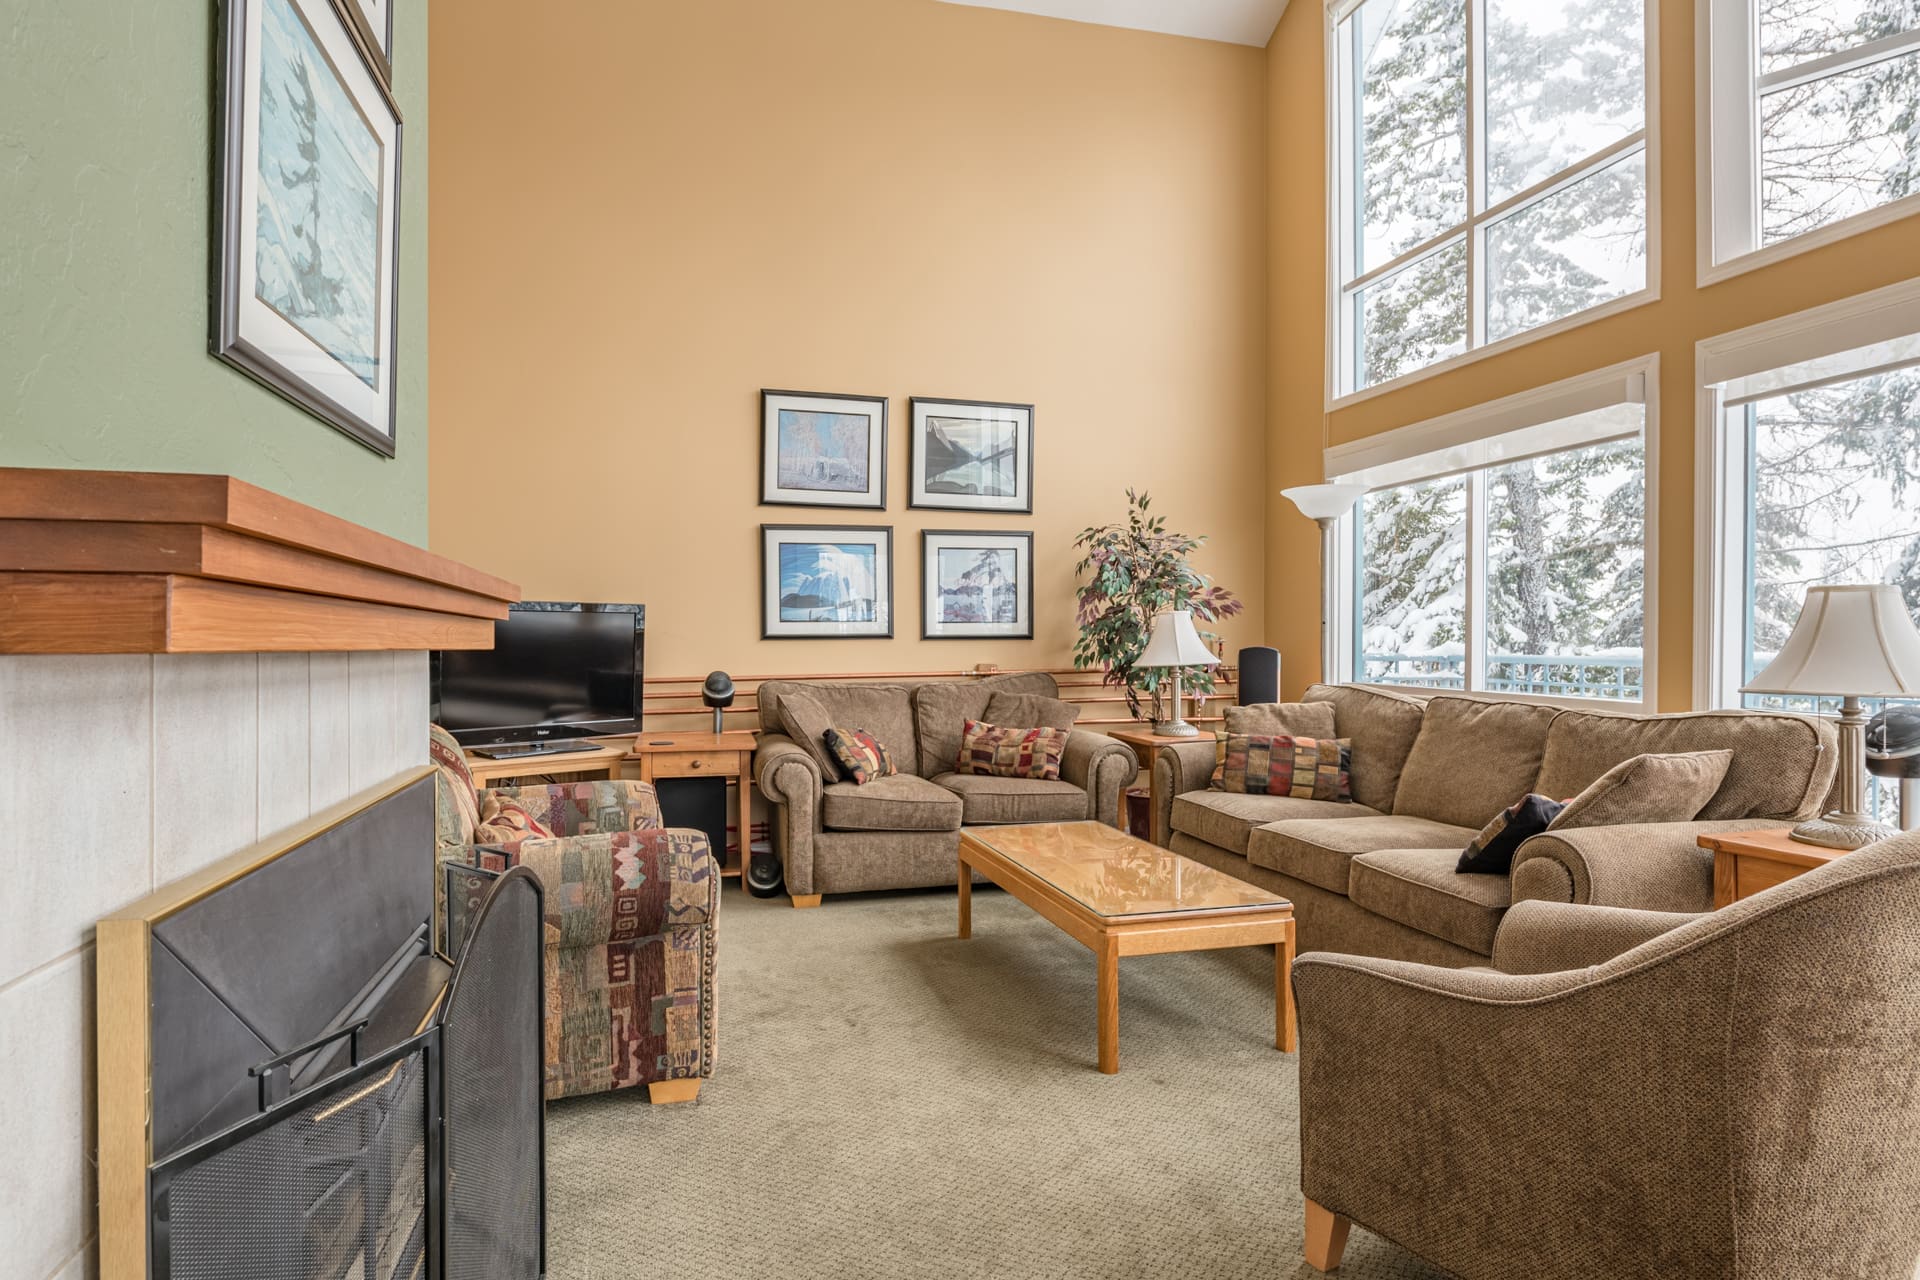 Living room of home with bright large windows and incredible views. Amazing location with skiway directly out the back door to whisk you to the village in minutes. Private hot tub, laundry, garage for storage and it's pet-friendly!